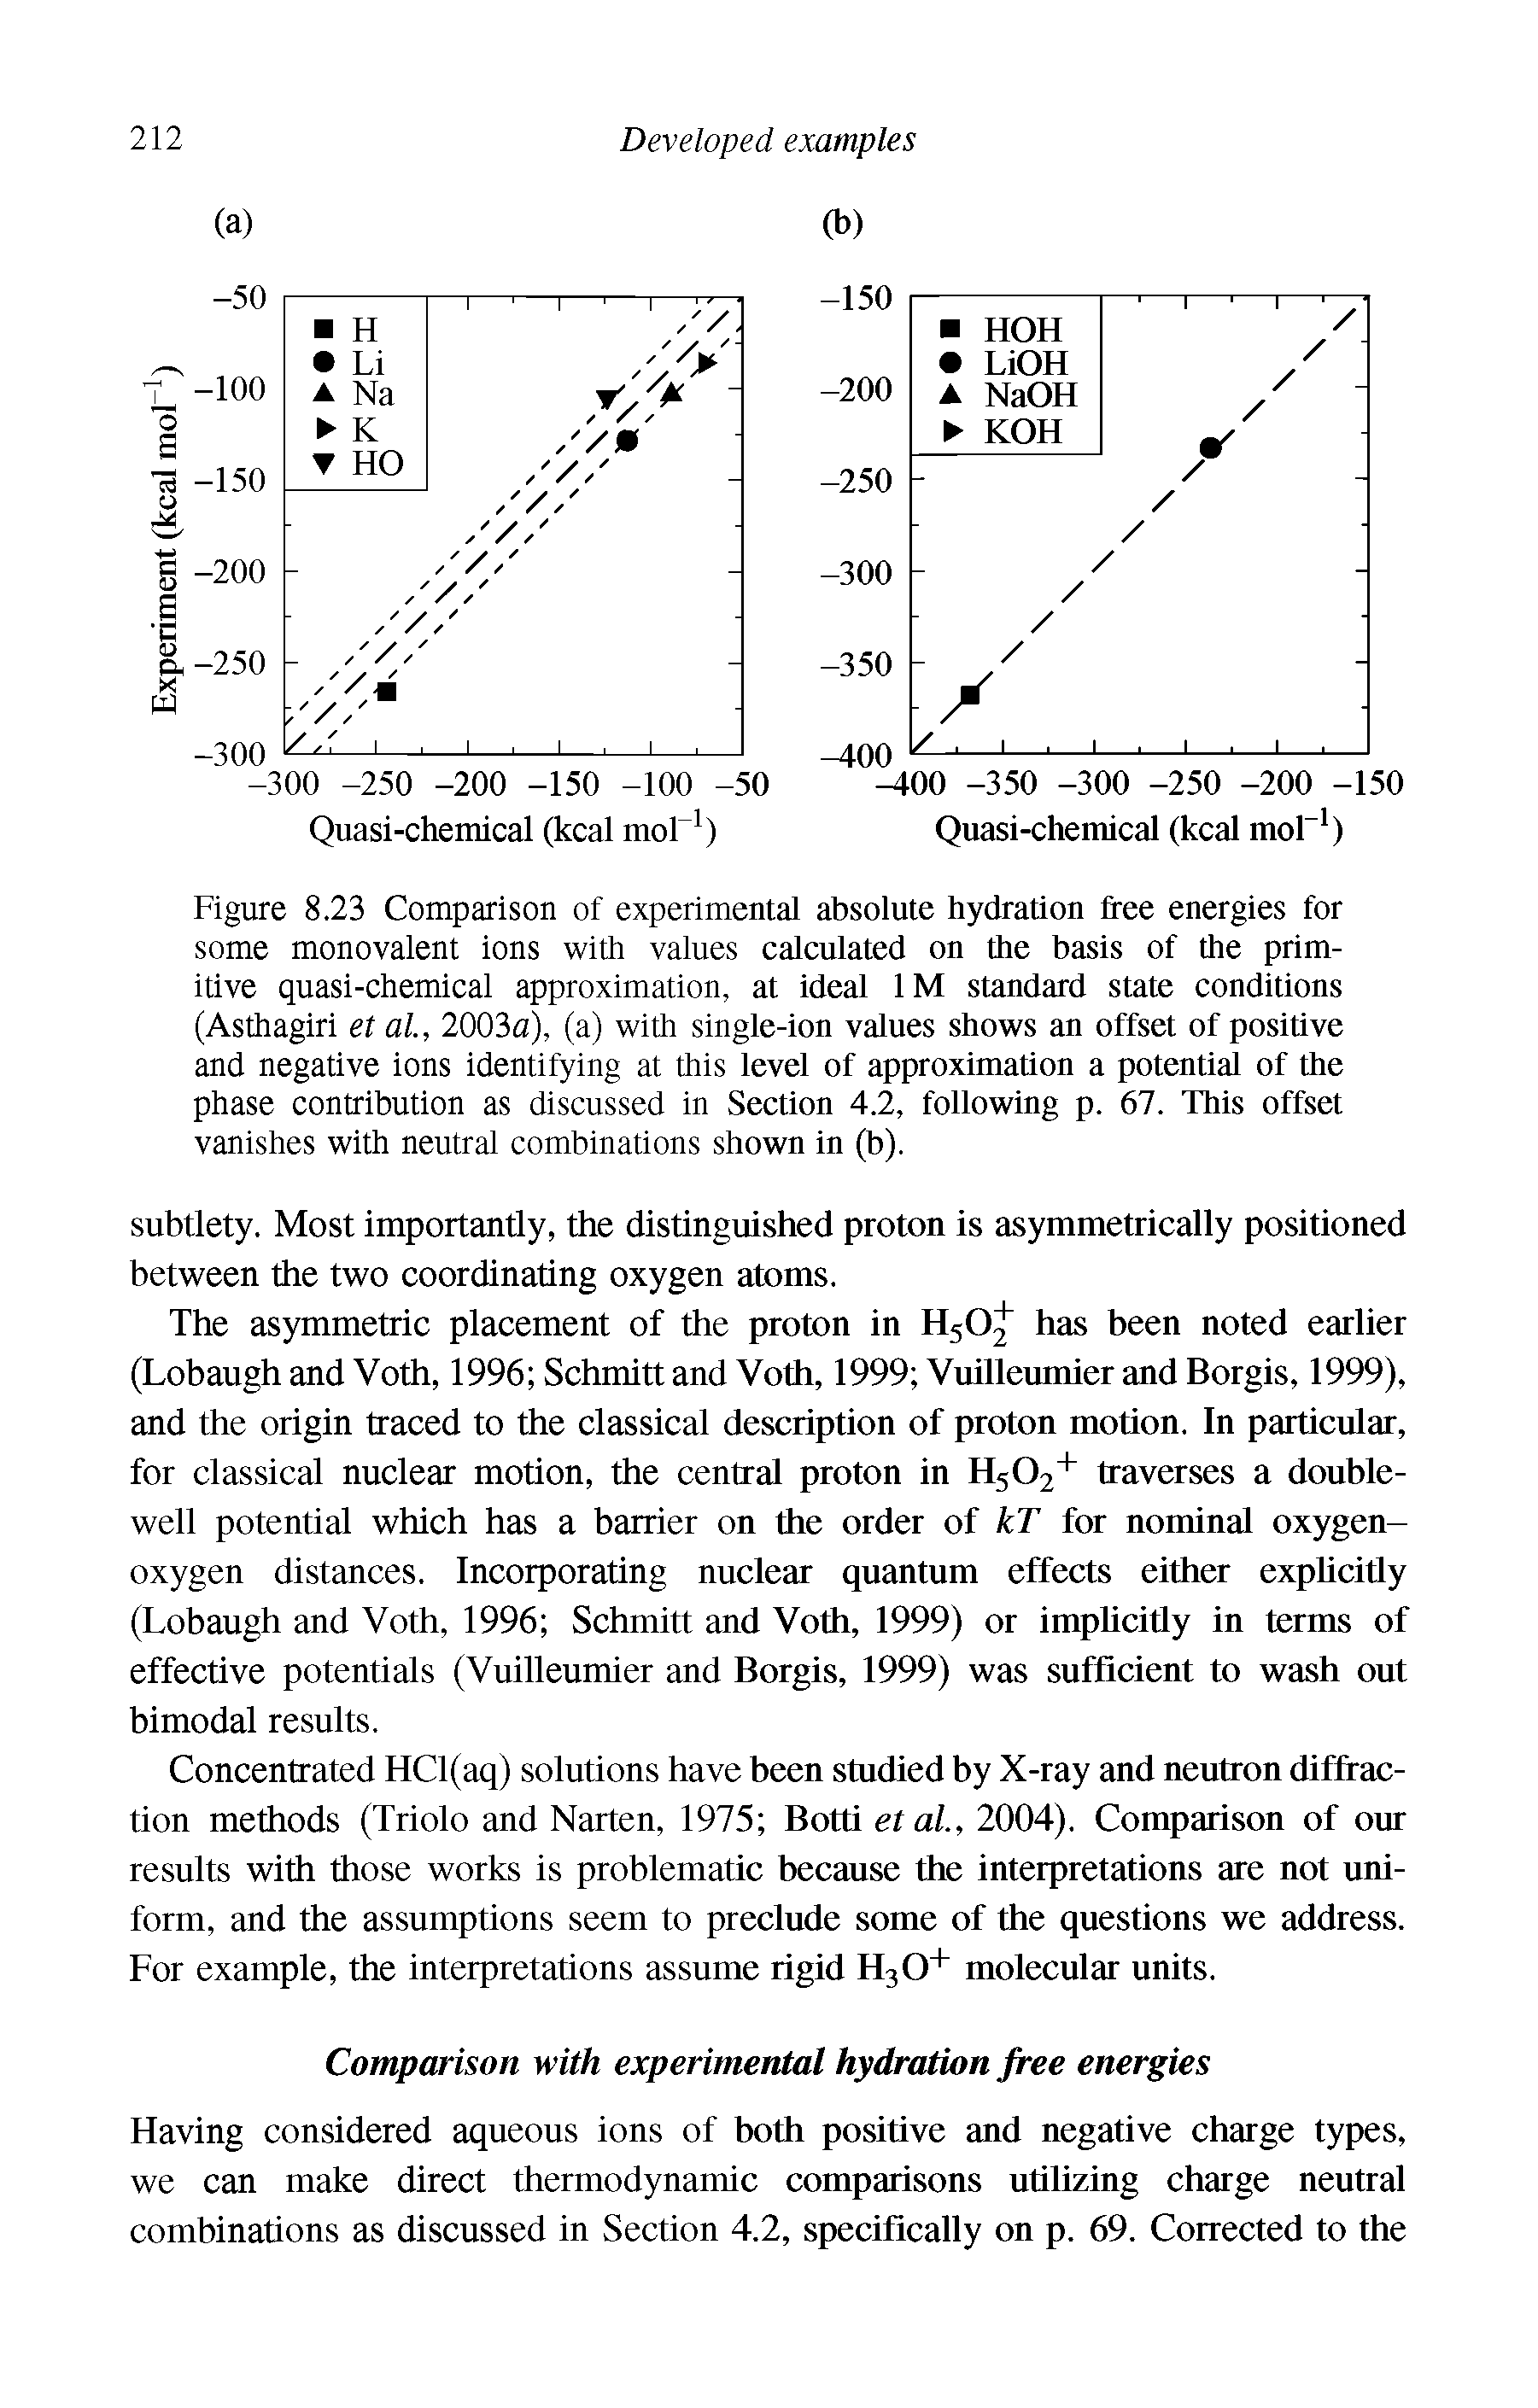 Figure 8.23 Comparison of experimental absolute hydration free energies for some monovalent ions with values calculated on the basis of the primitive quasi-chemical approximation, at ideal 1M standard state conditions (Asthagiri et al, 2003a), (a) with single-ion values shows an offset of positive and negative ions identifying at this level of approximation a potential of the phase contribution as discussed in Section 4.2, following p. 67. This offset vanishes with neutral combinations shown in (b).